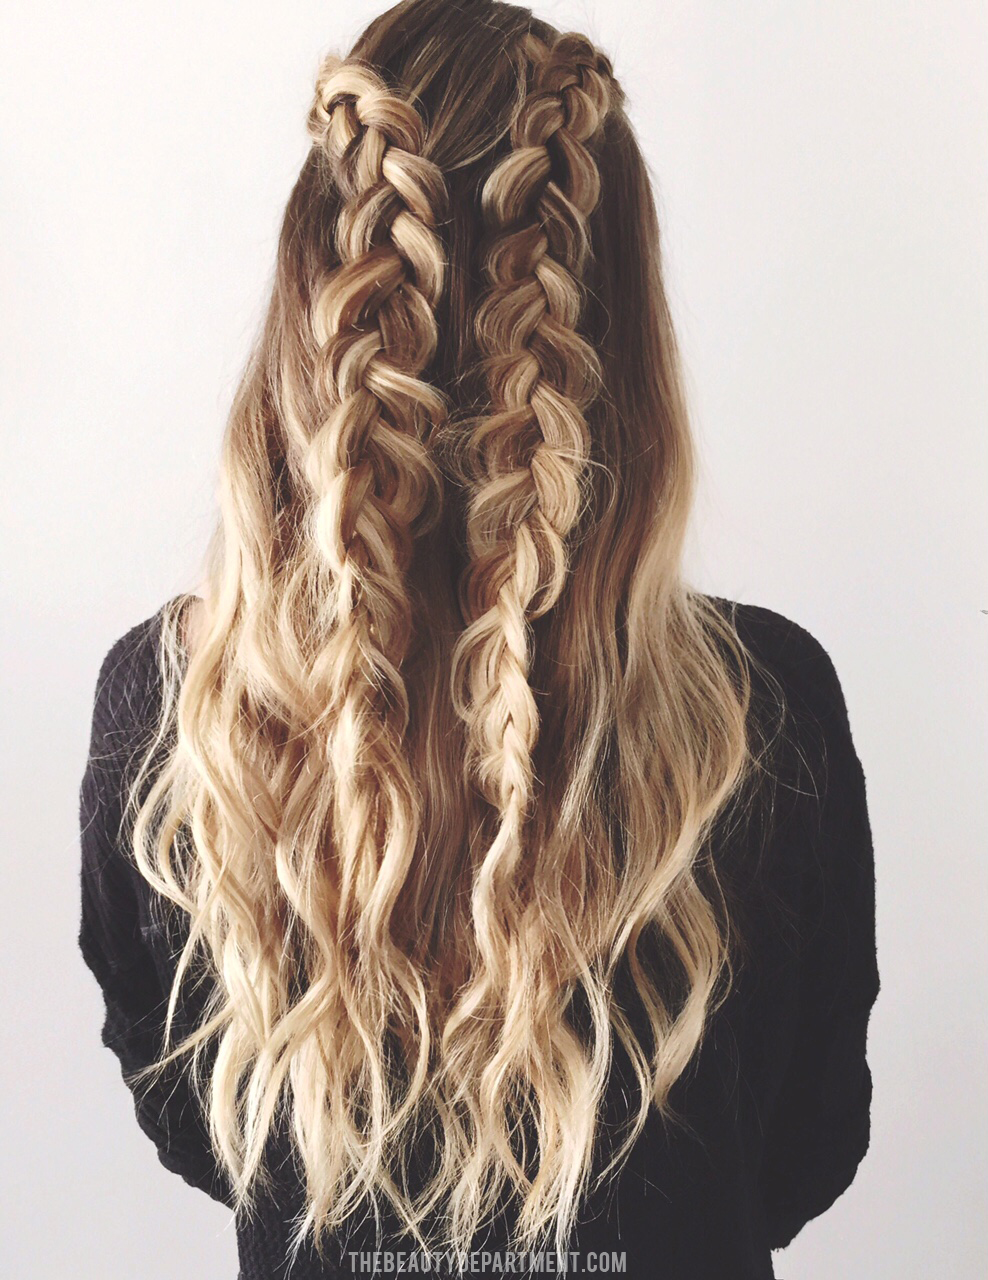 The Beauty Department Your Daily Dose Of Pretty 2 Braids